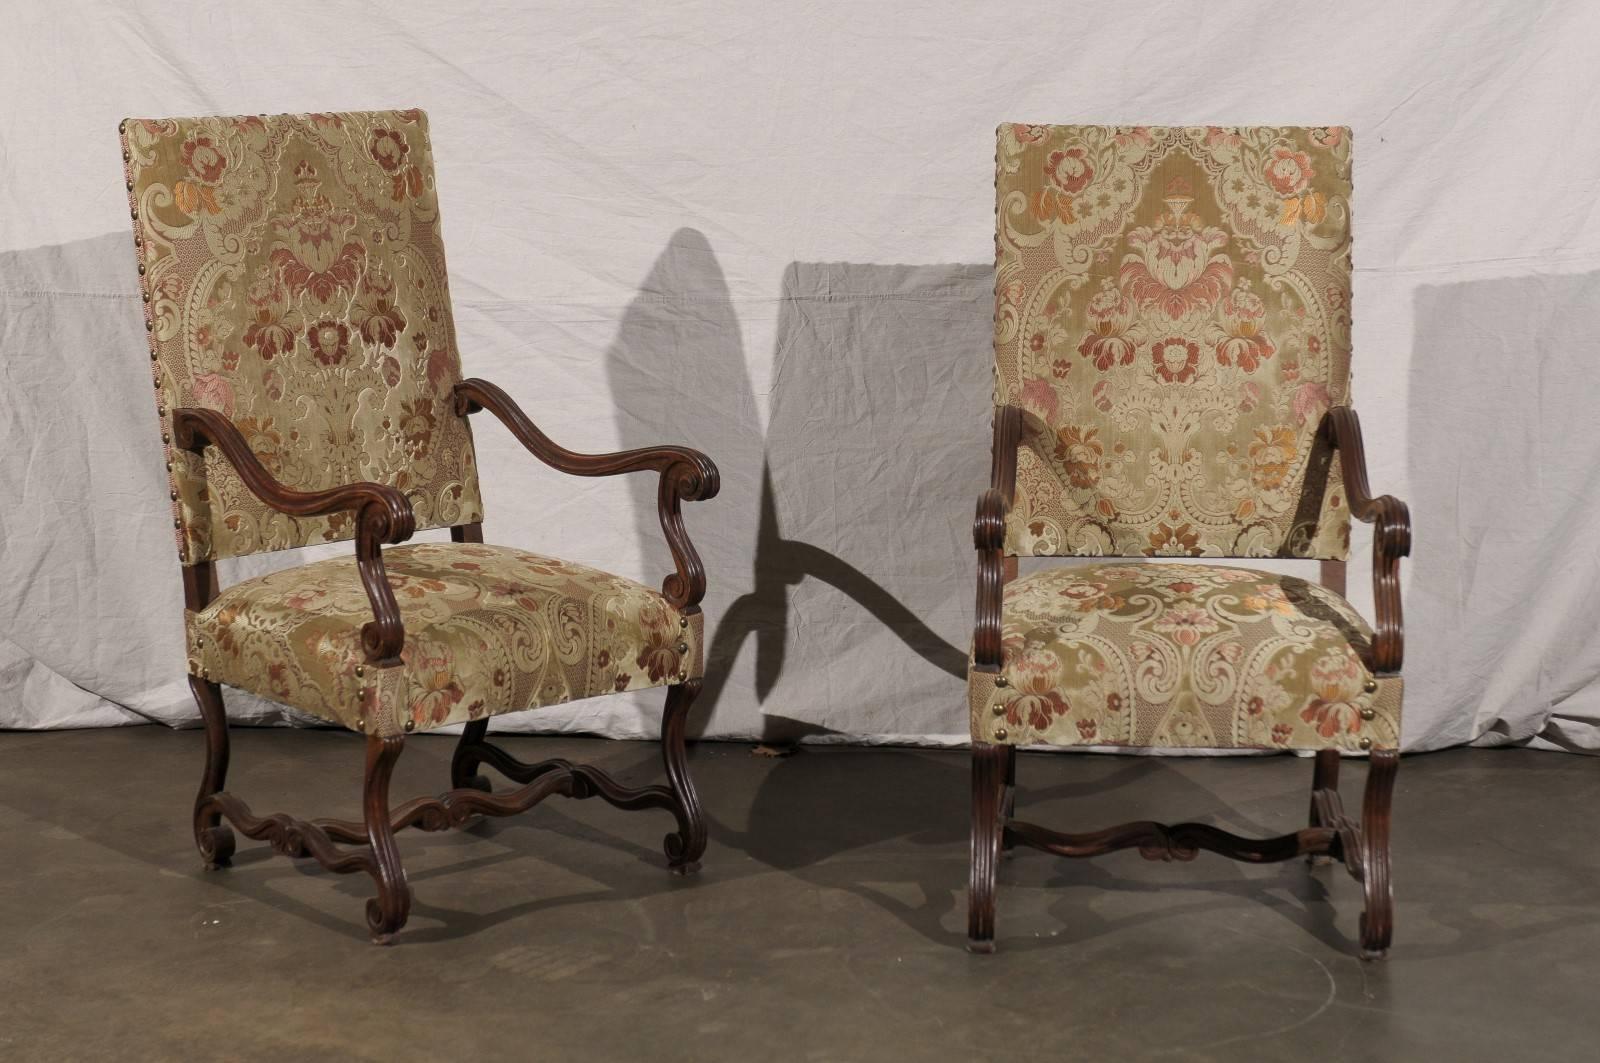 Pair of 19th century French walnut high back chairs, SH: 19